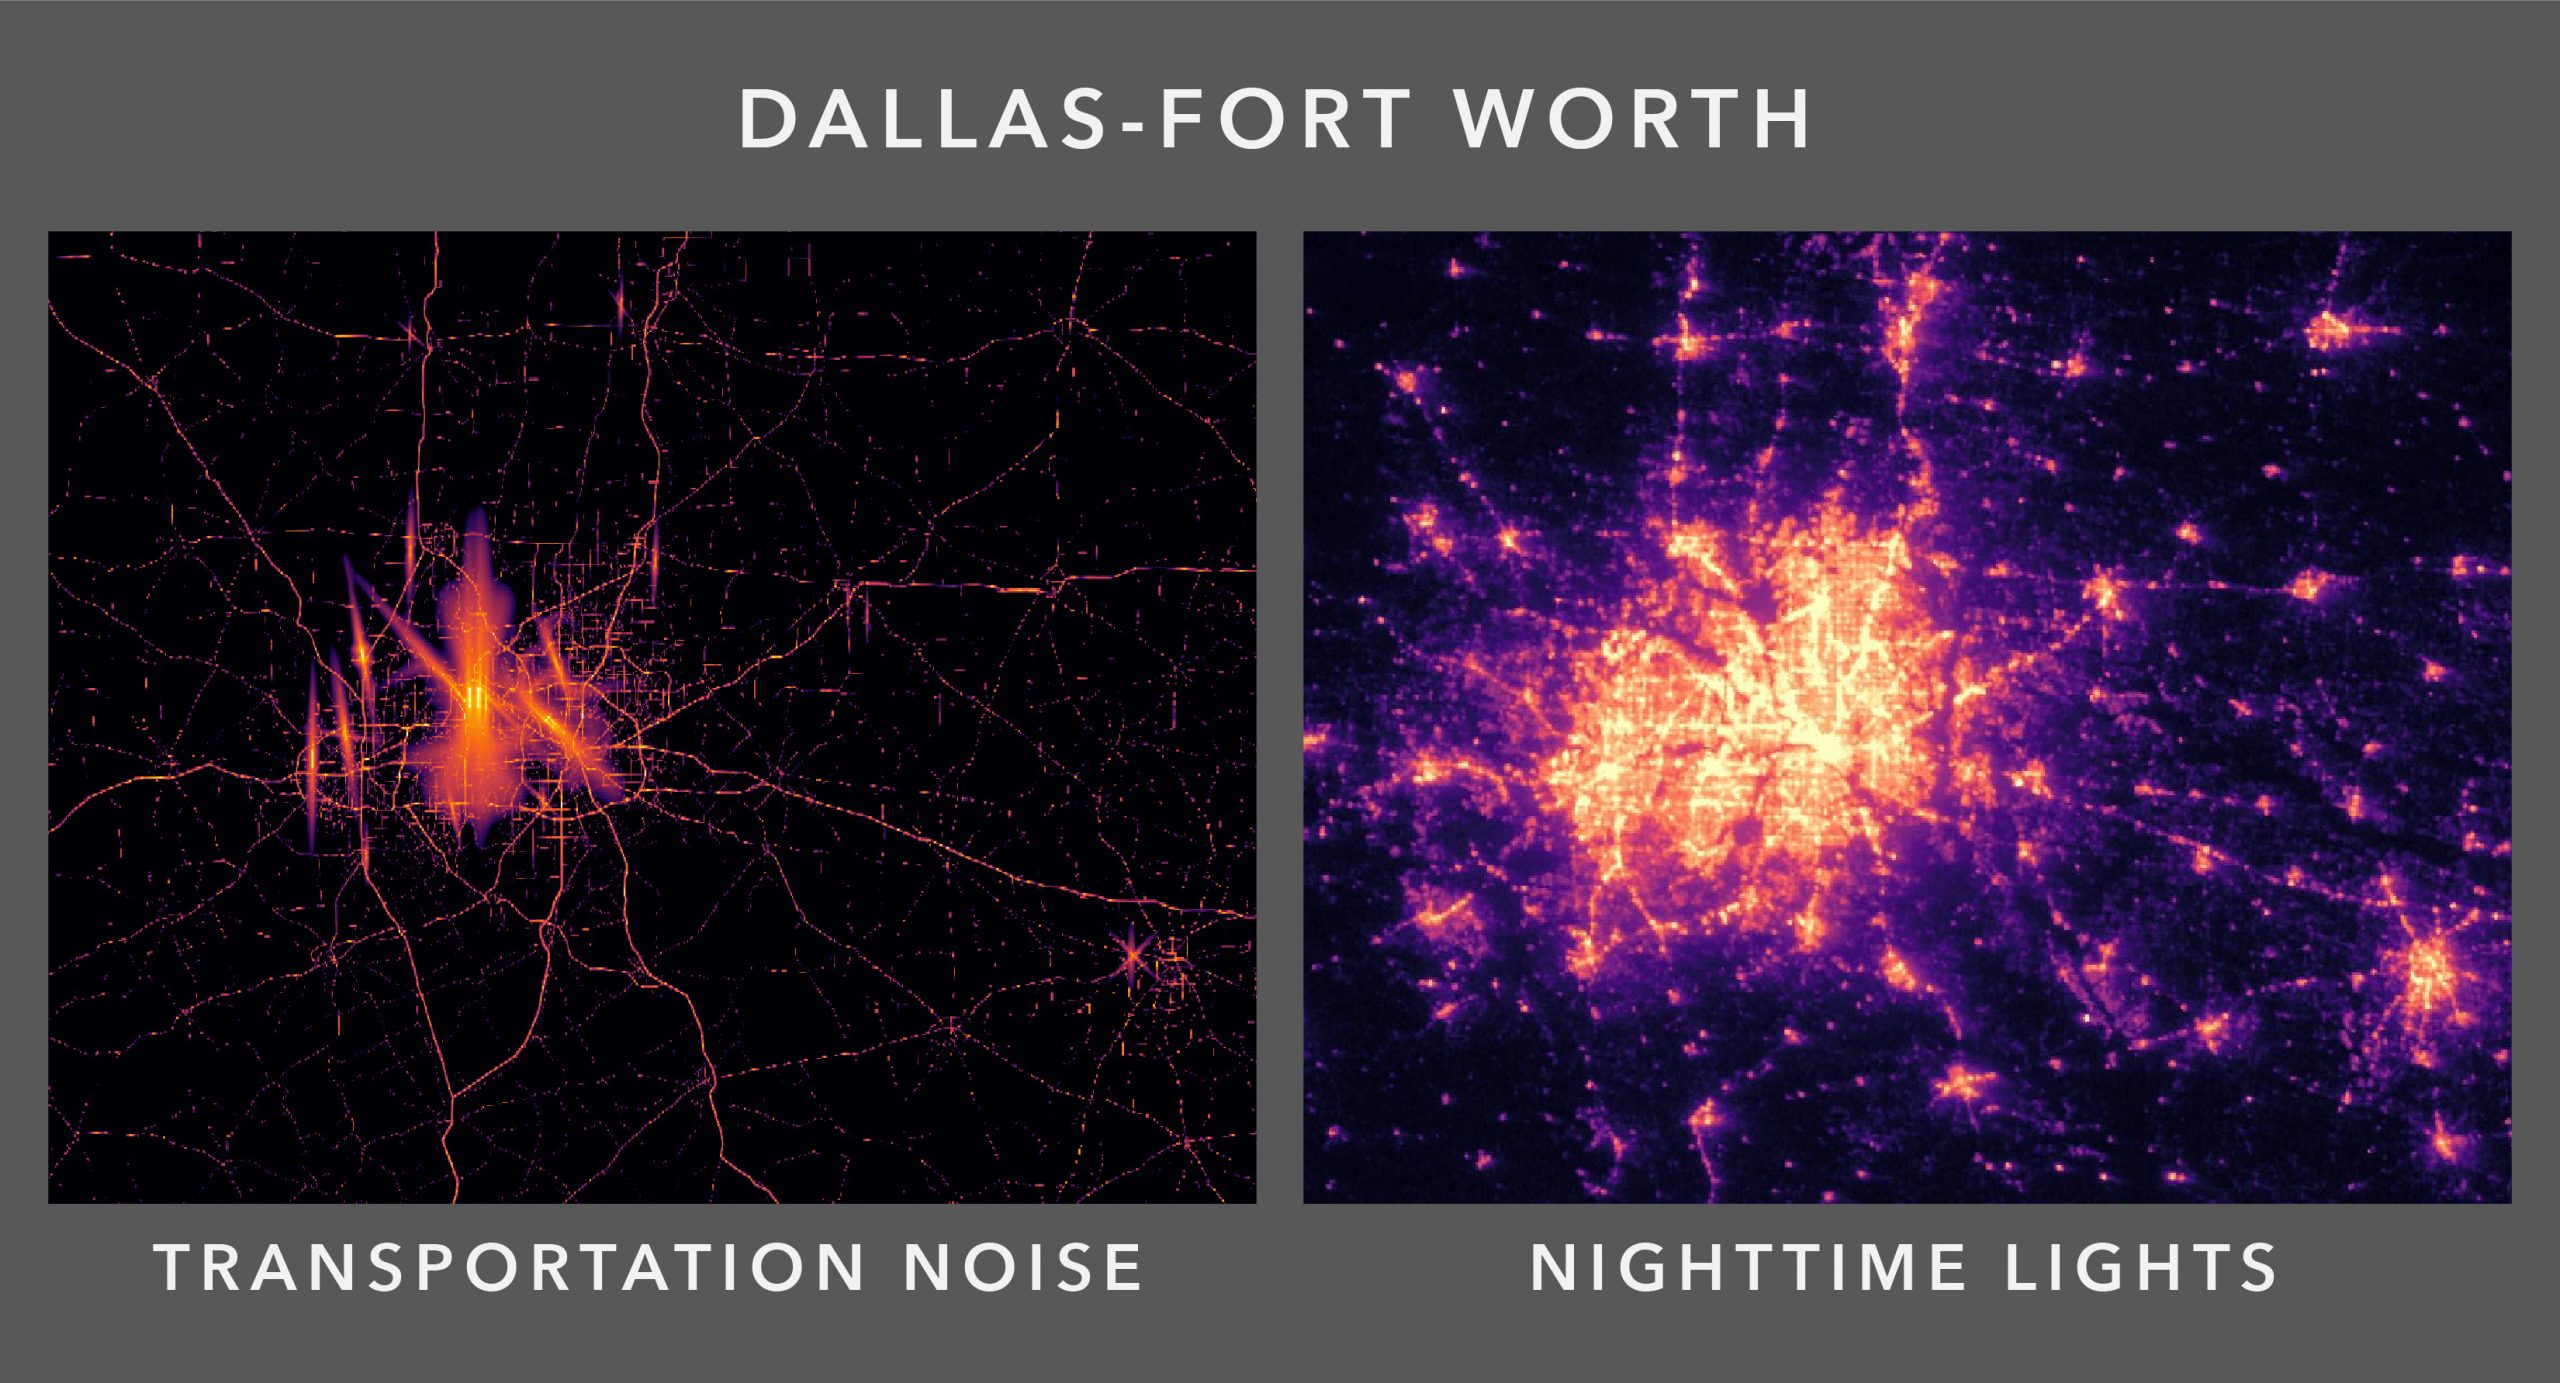 Dallas-Fort Worth graphic showing the two layers of transportation noise and nighttime lights.